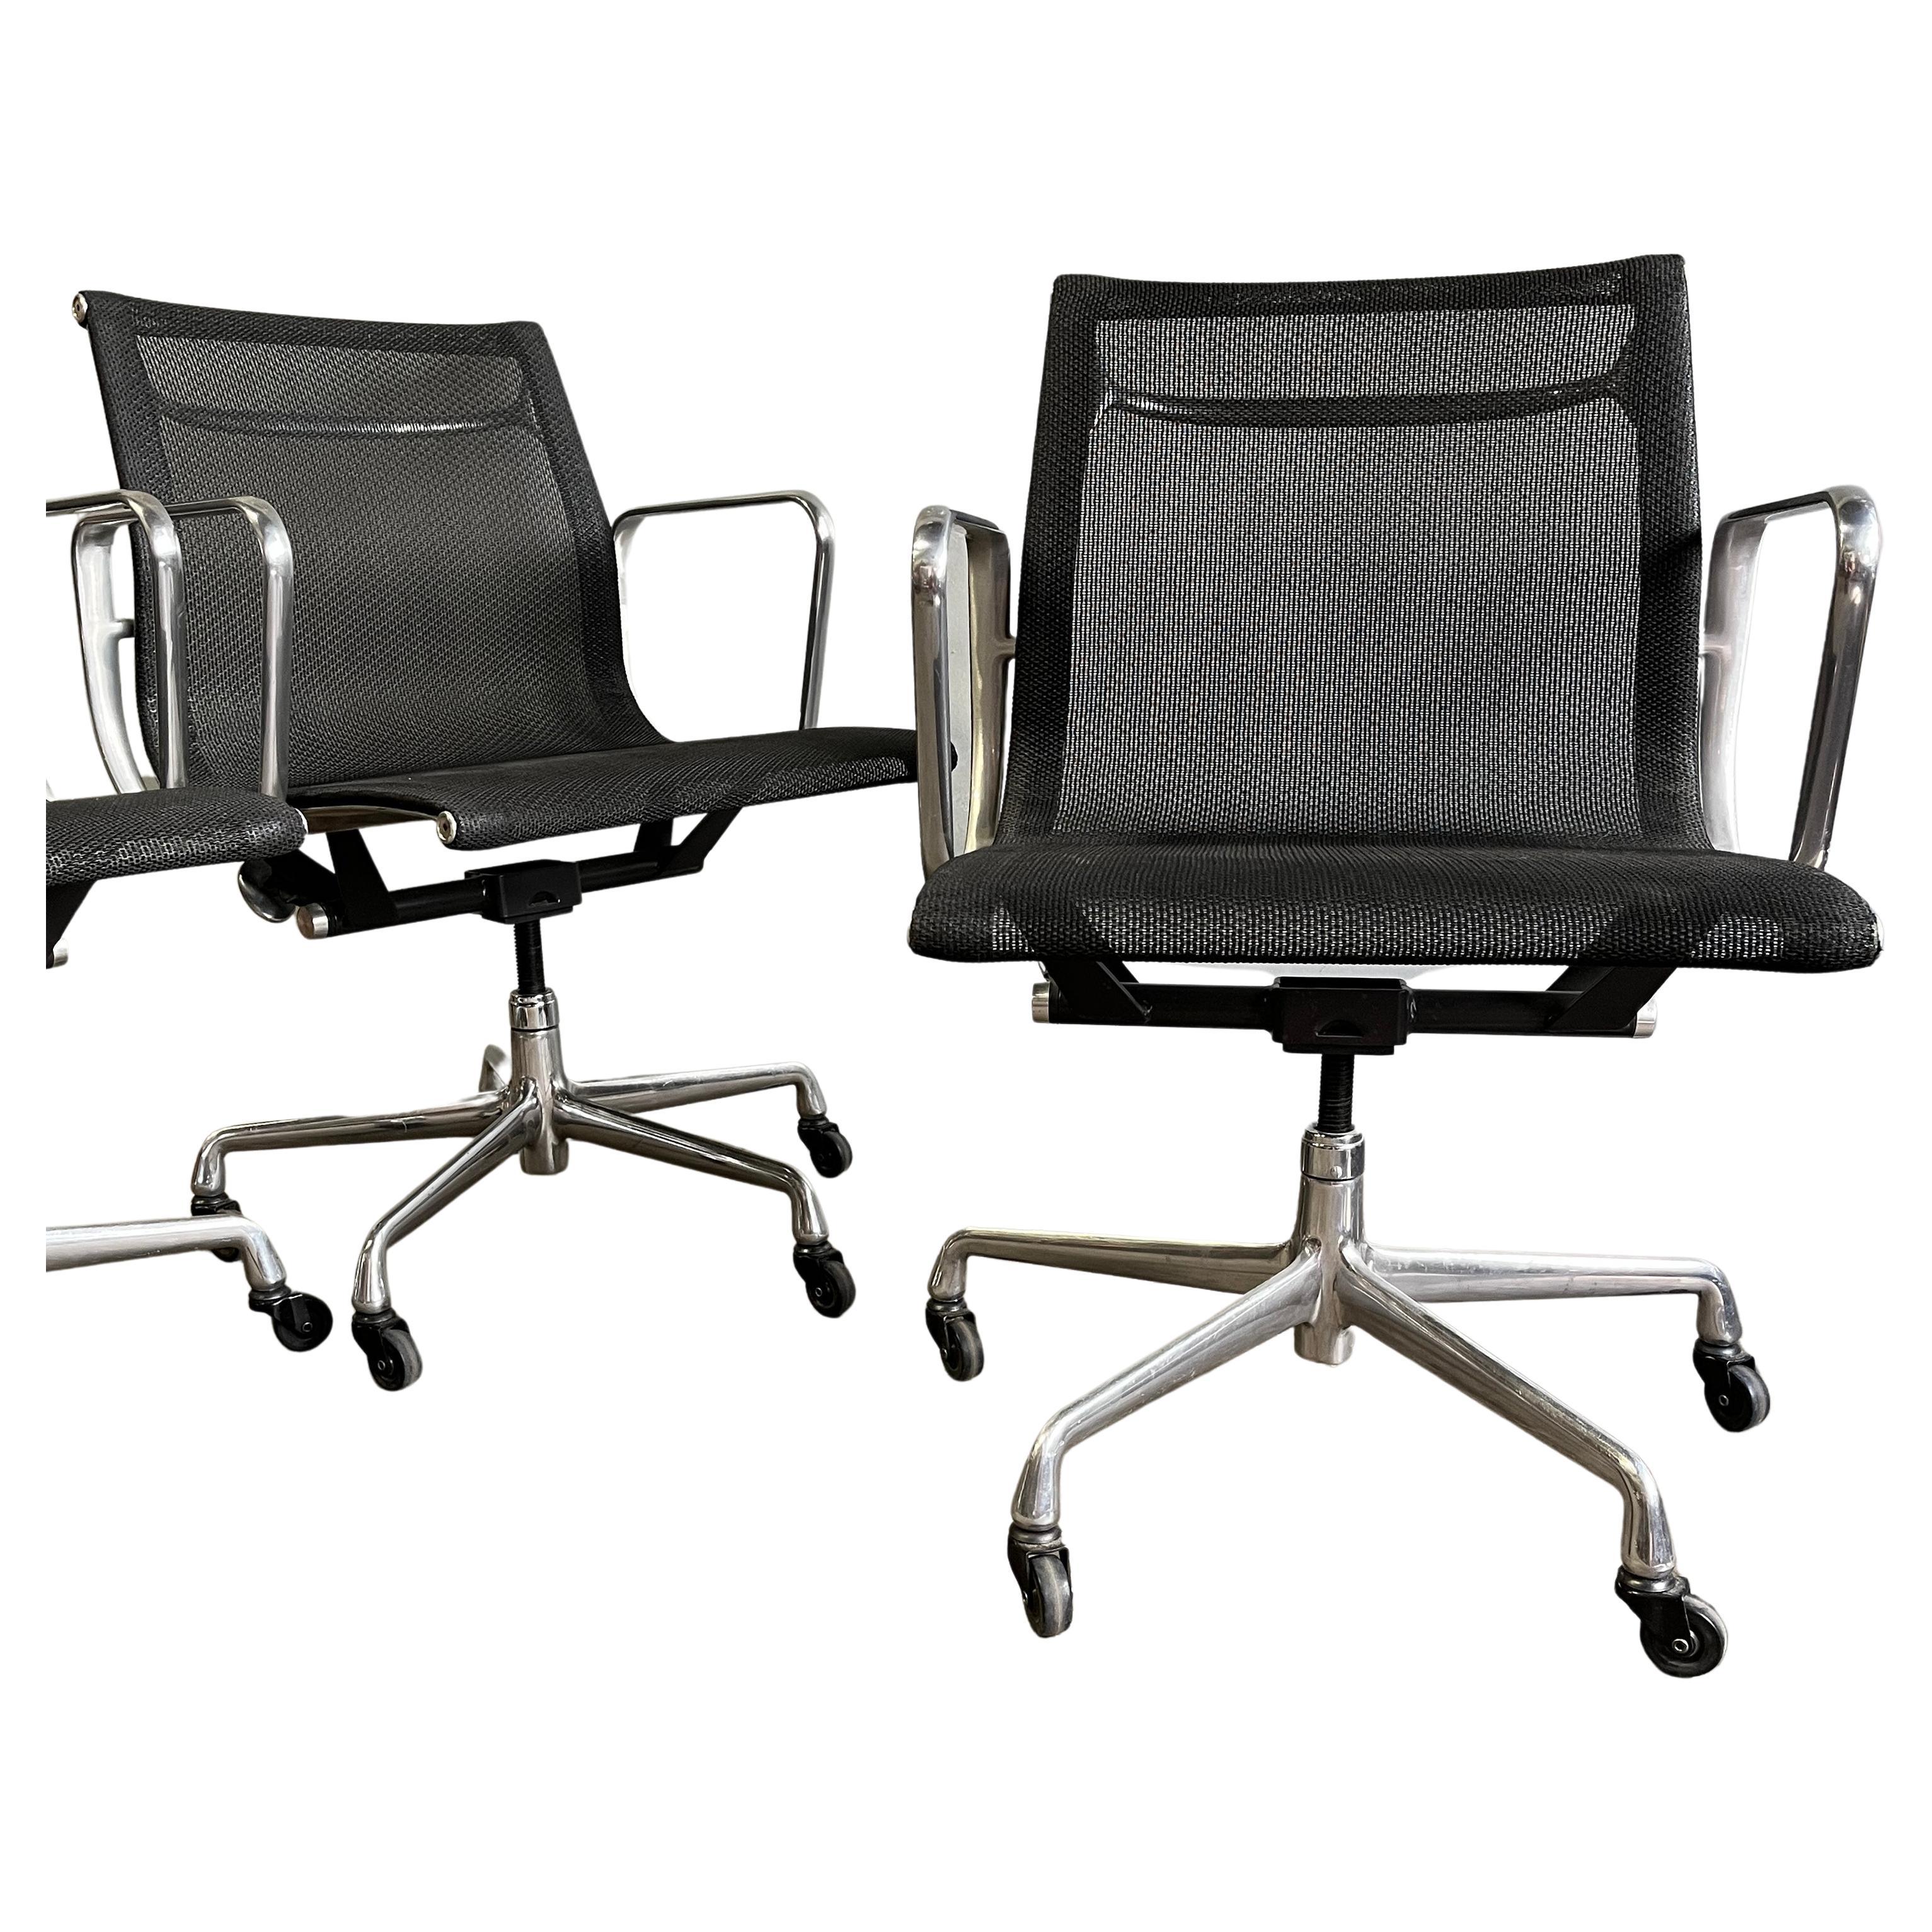 For your consideration are up to 40 Aluminium Group Management chairs in black mesh designed by Eames for Herman Miller. All in very good original condition showing minimal wear. With manual tilt and height adjustment.


Management 
Height (in):